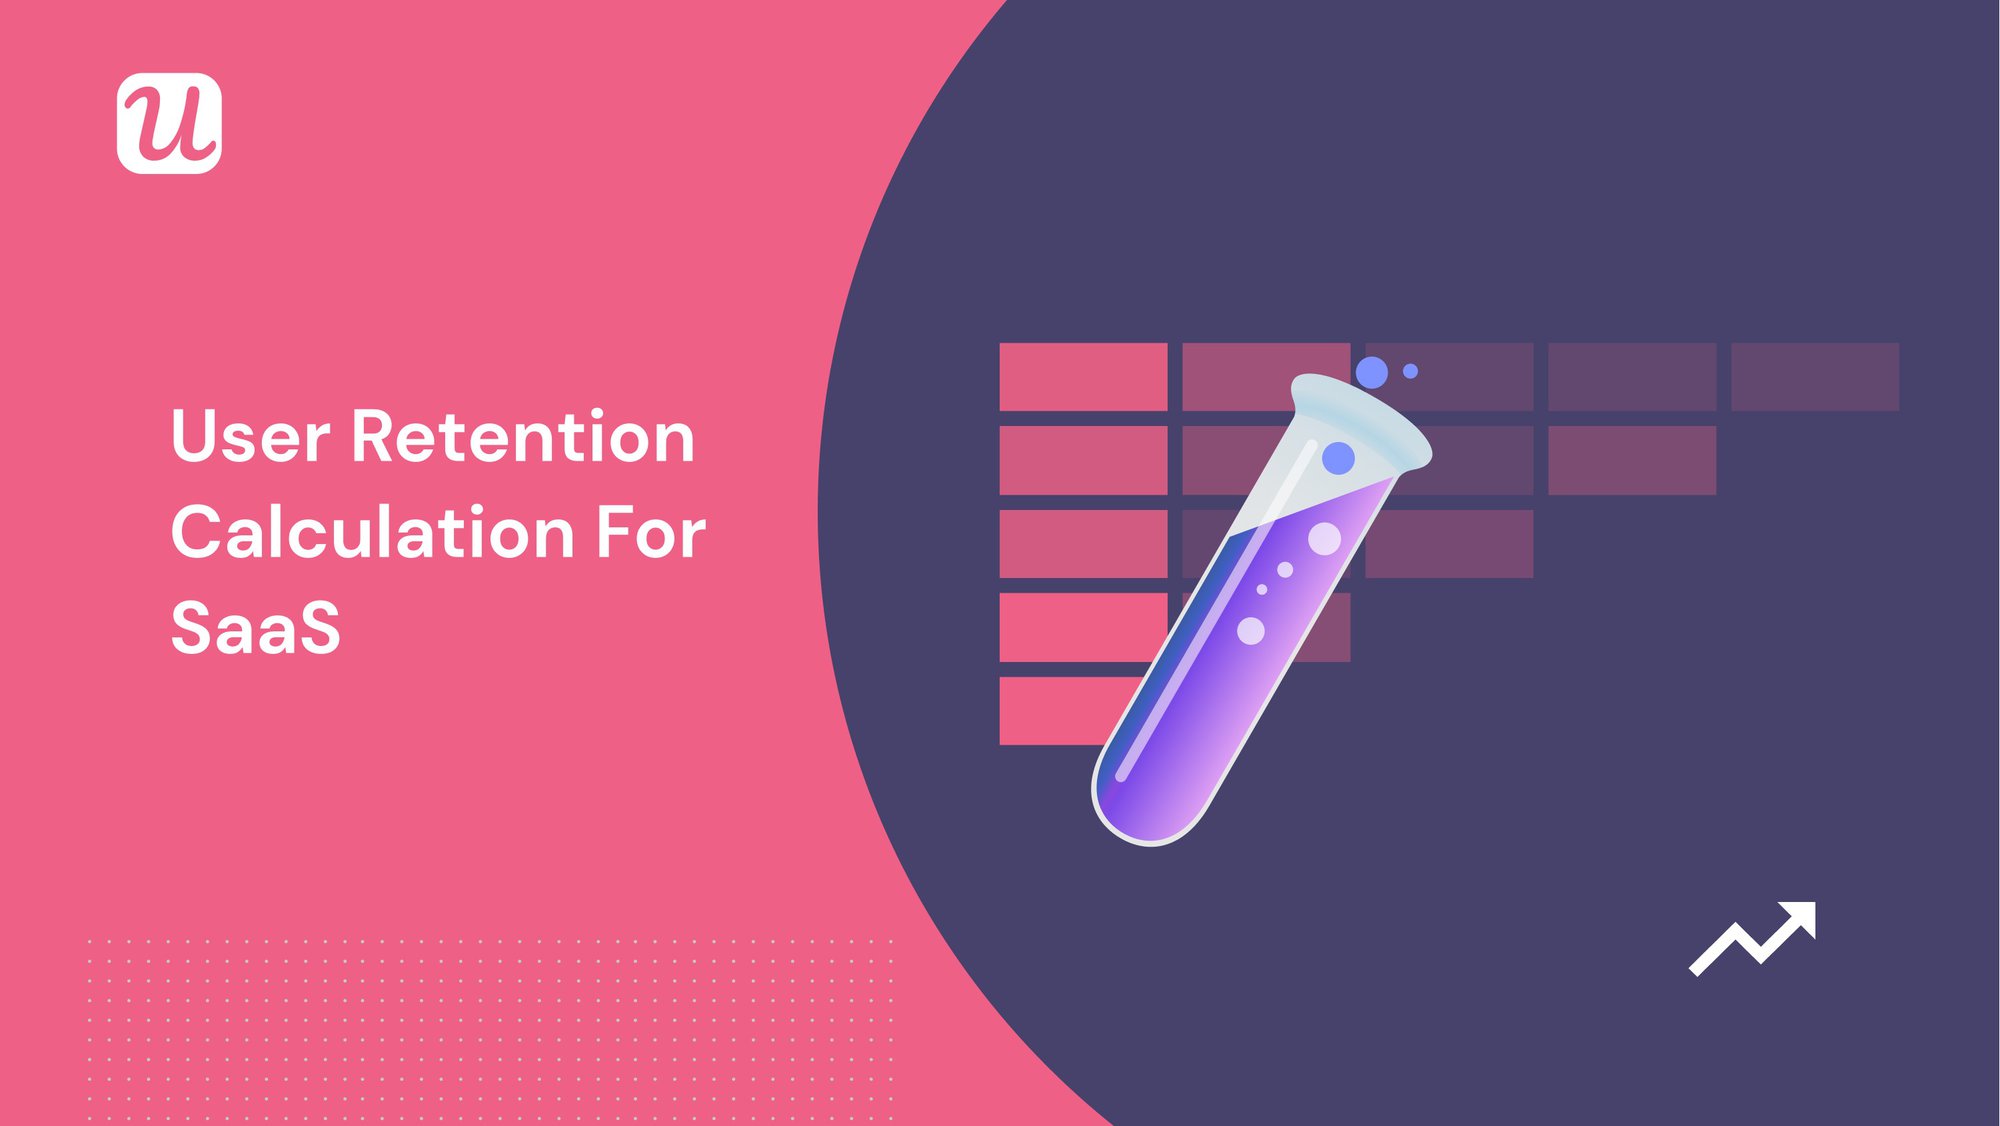 User Retention Calculation For SaaS